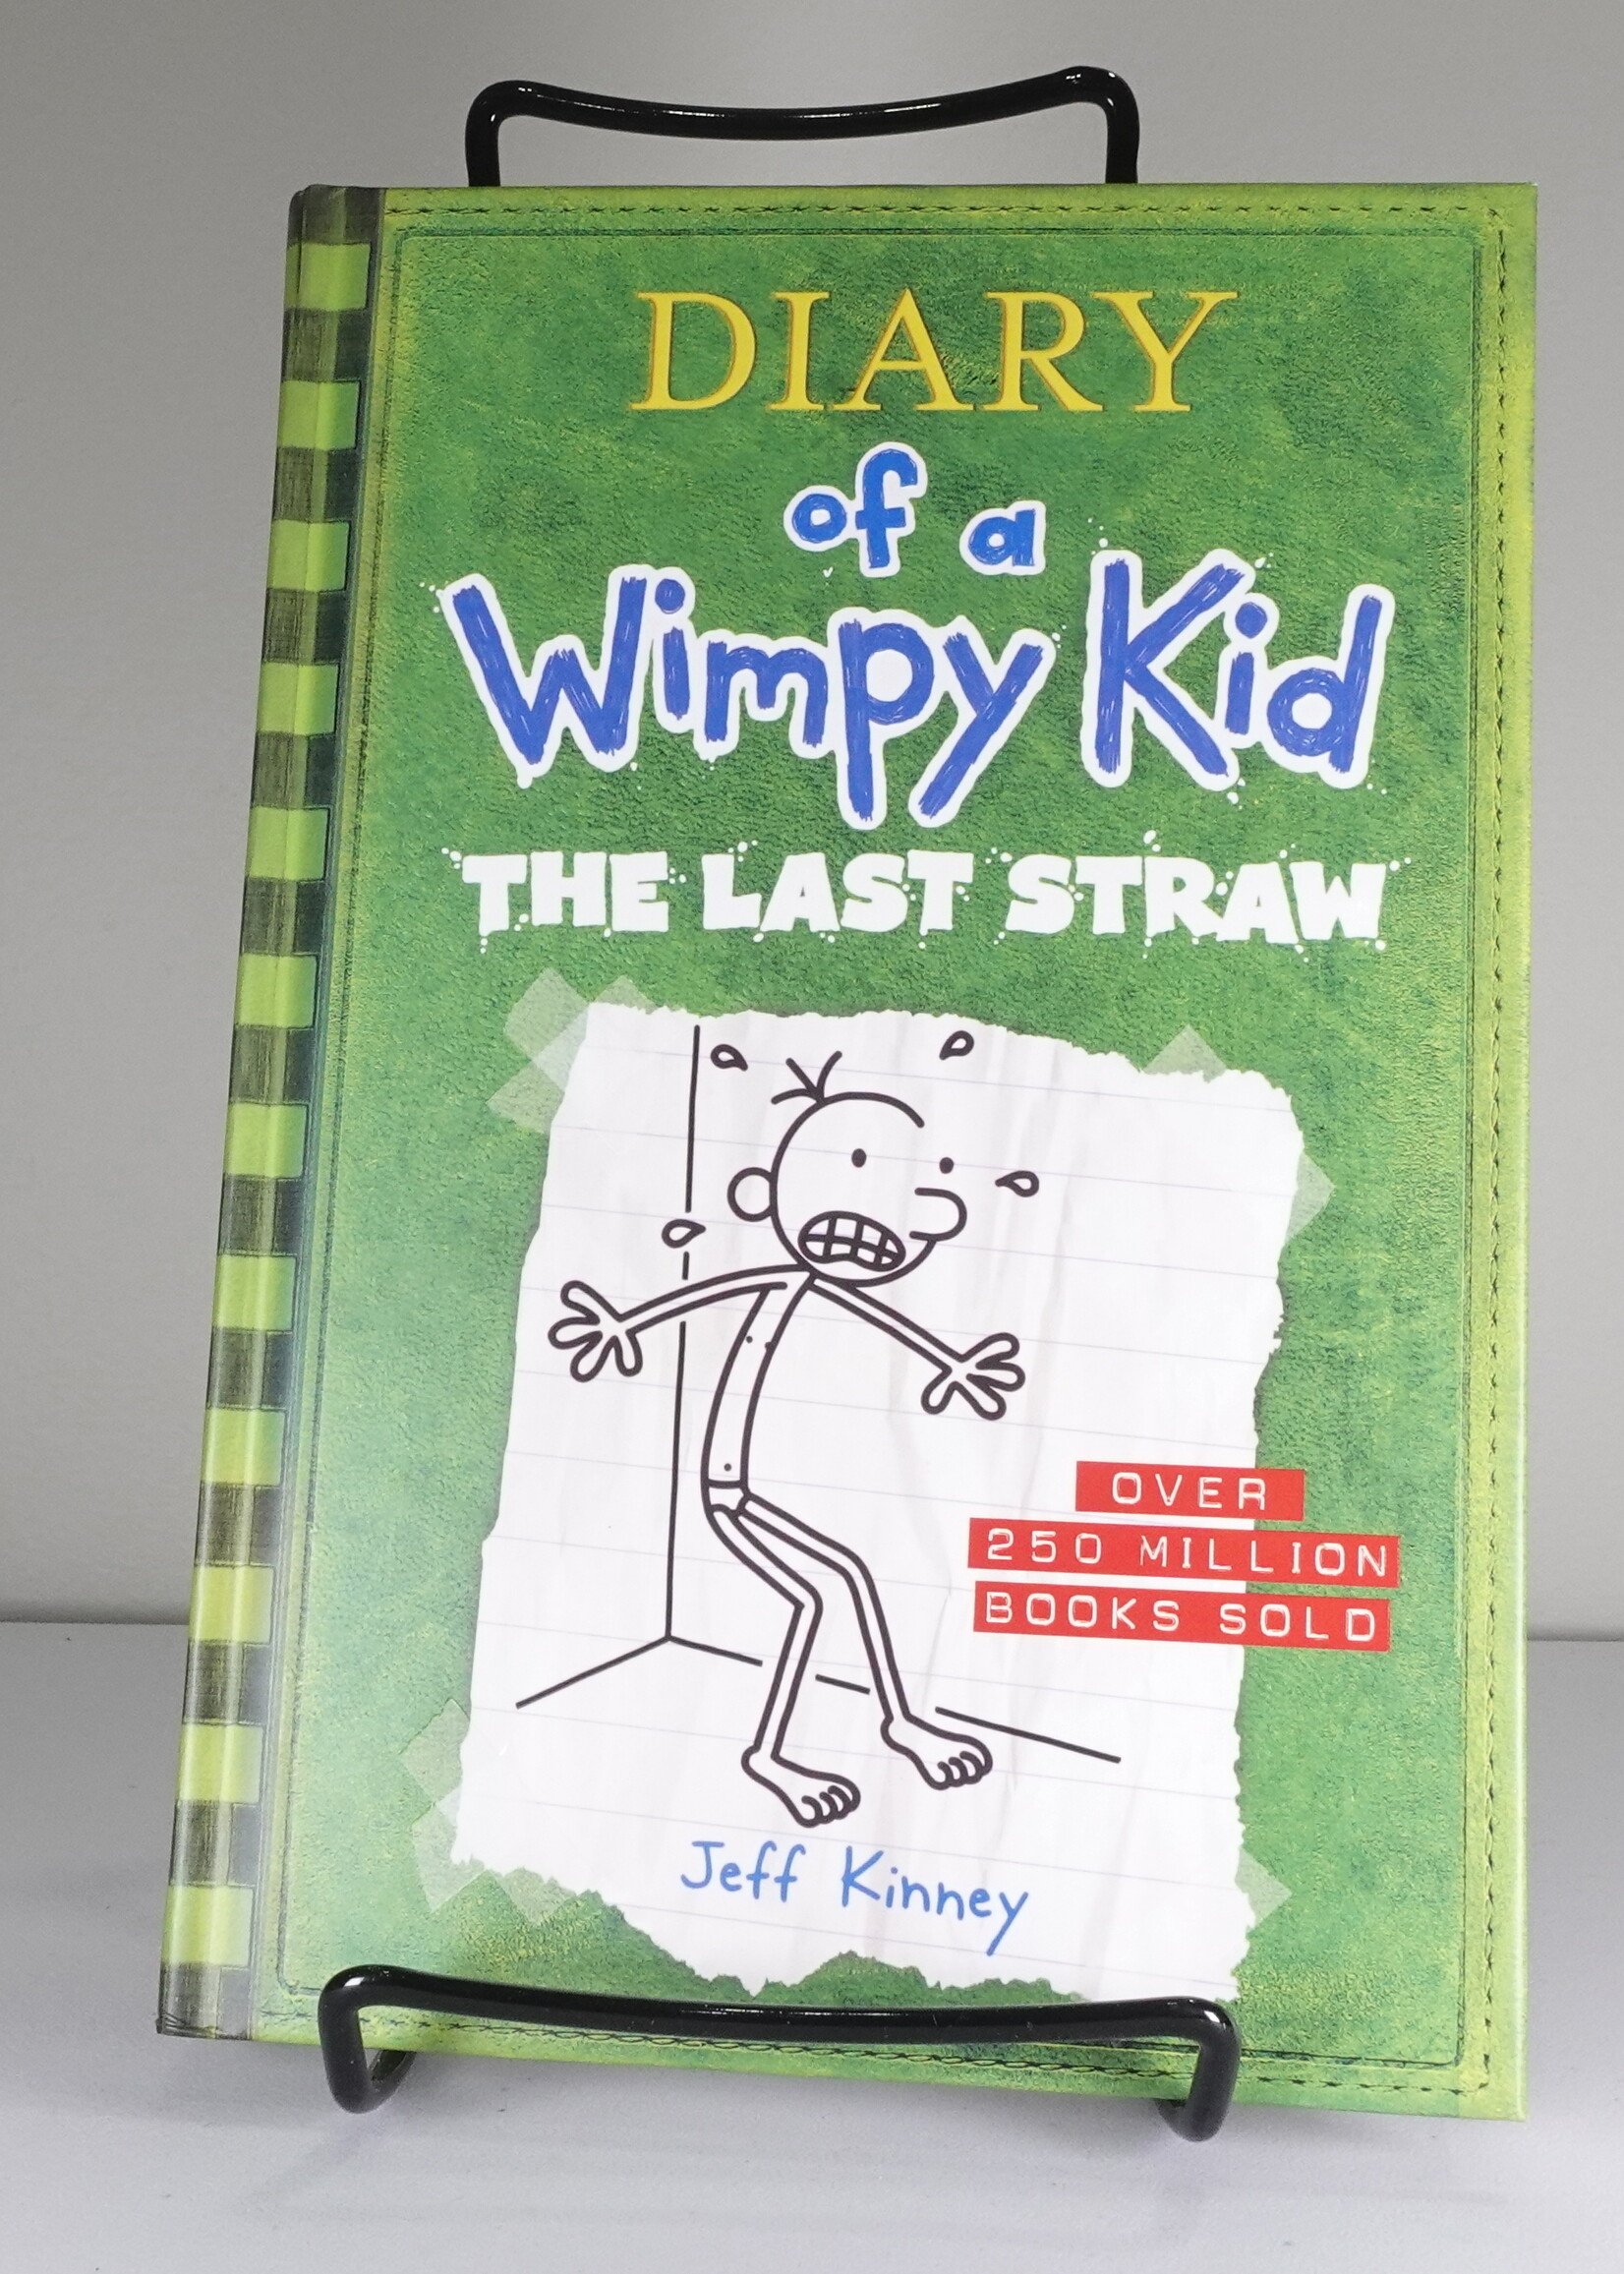 Amulet Diary of a Wimpy Kid: The Last Straw #3